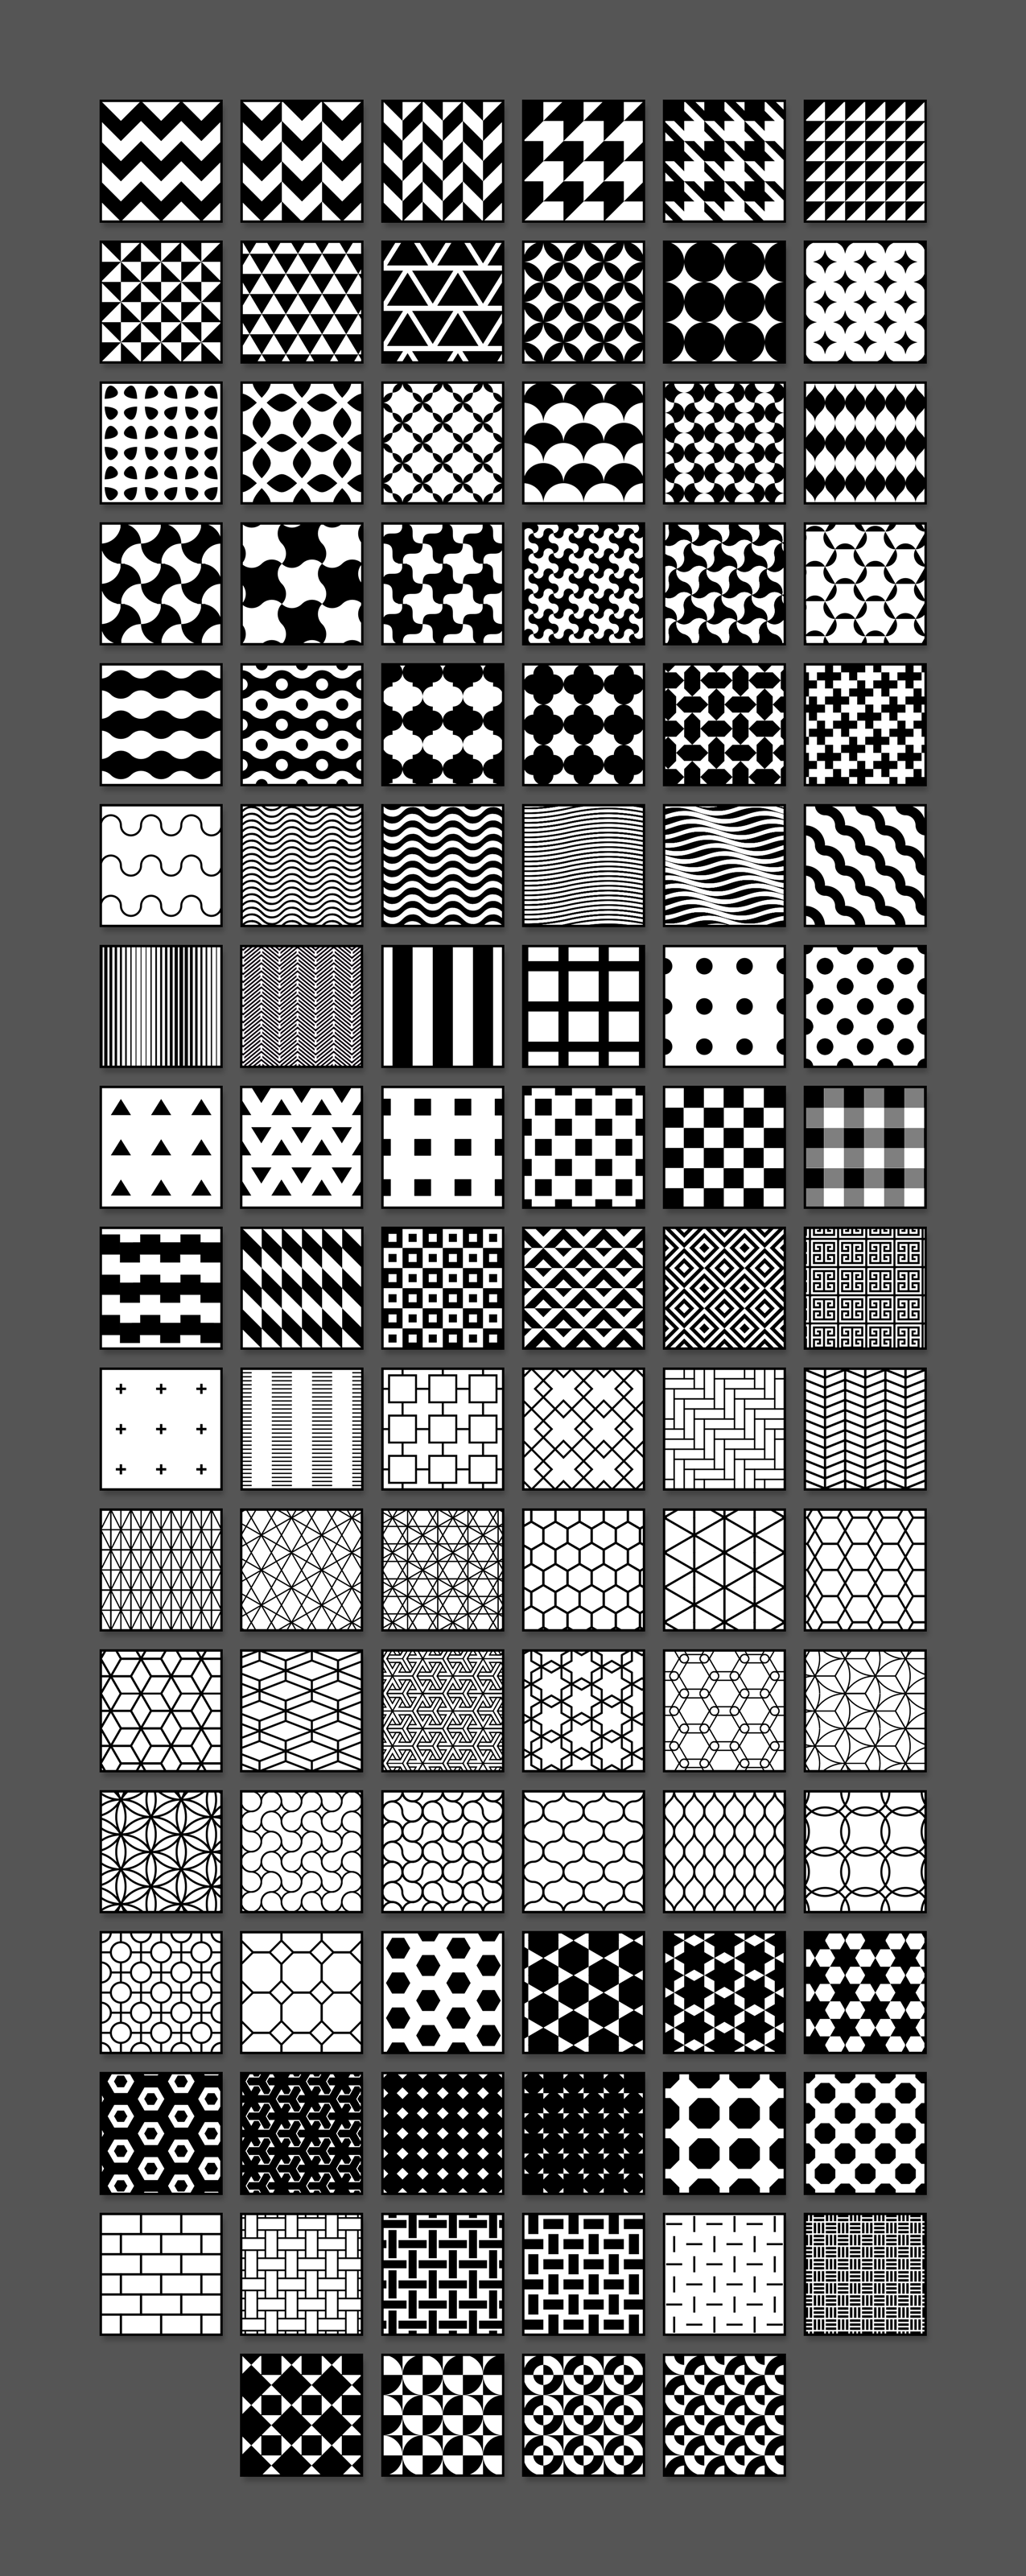 Grid of all 100 Seamless Patterns